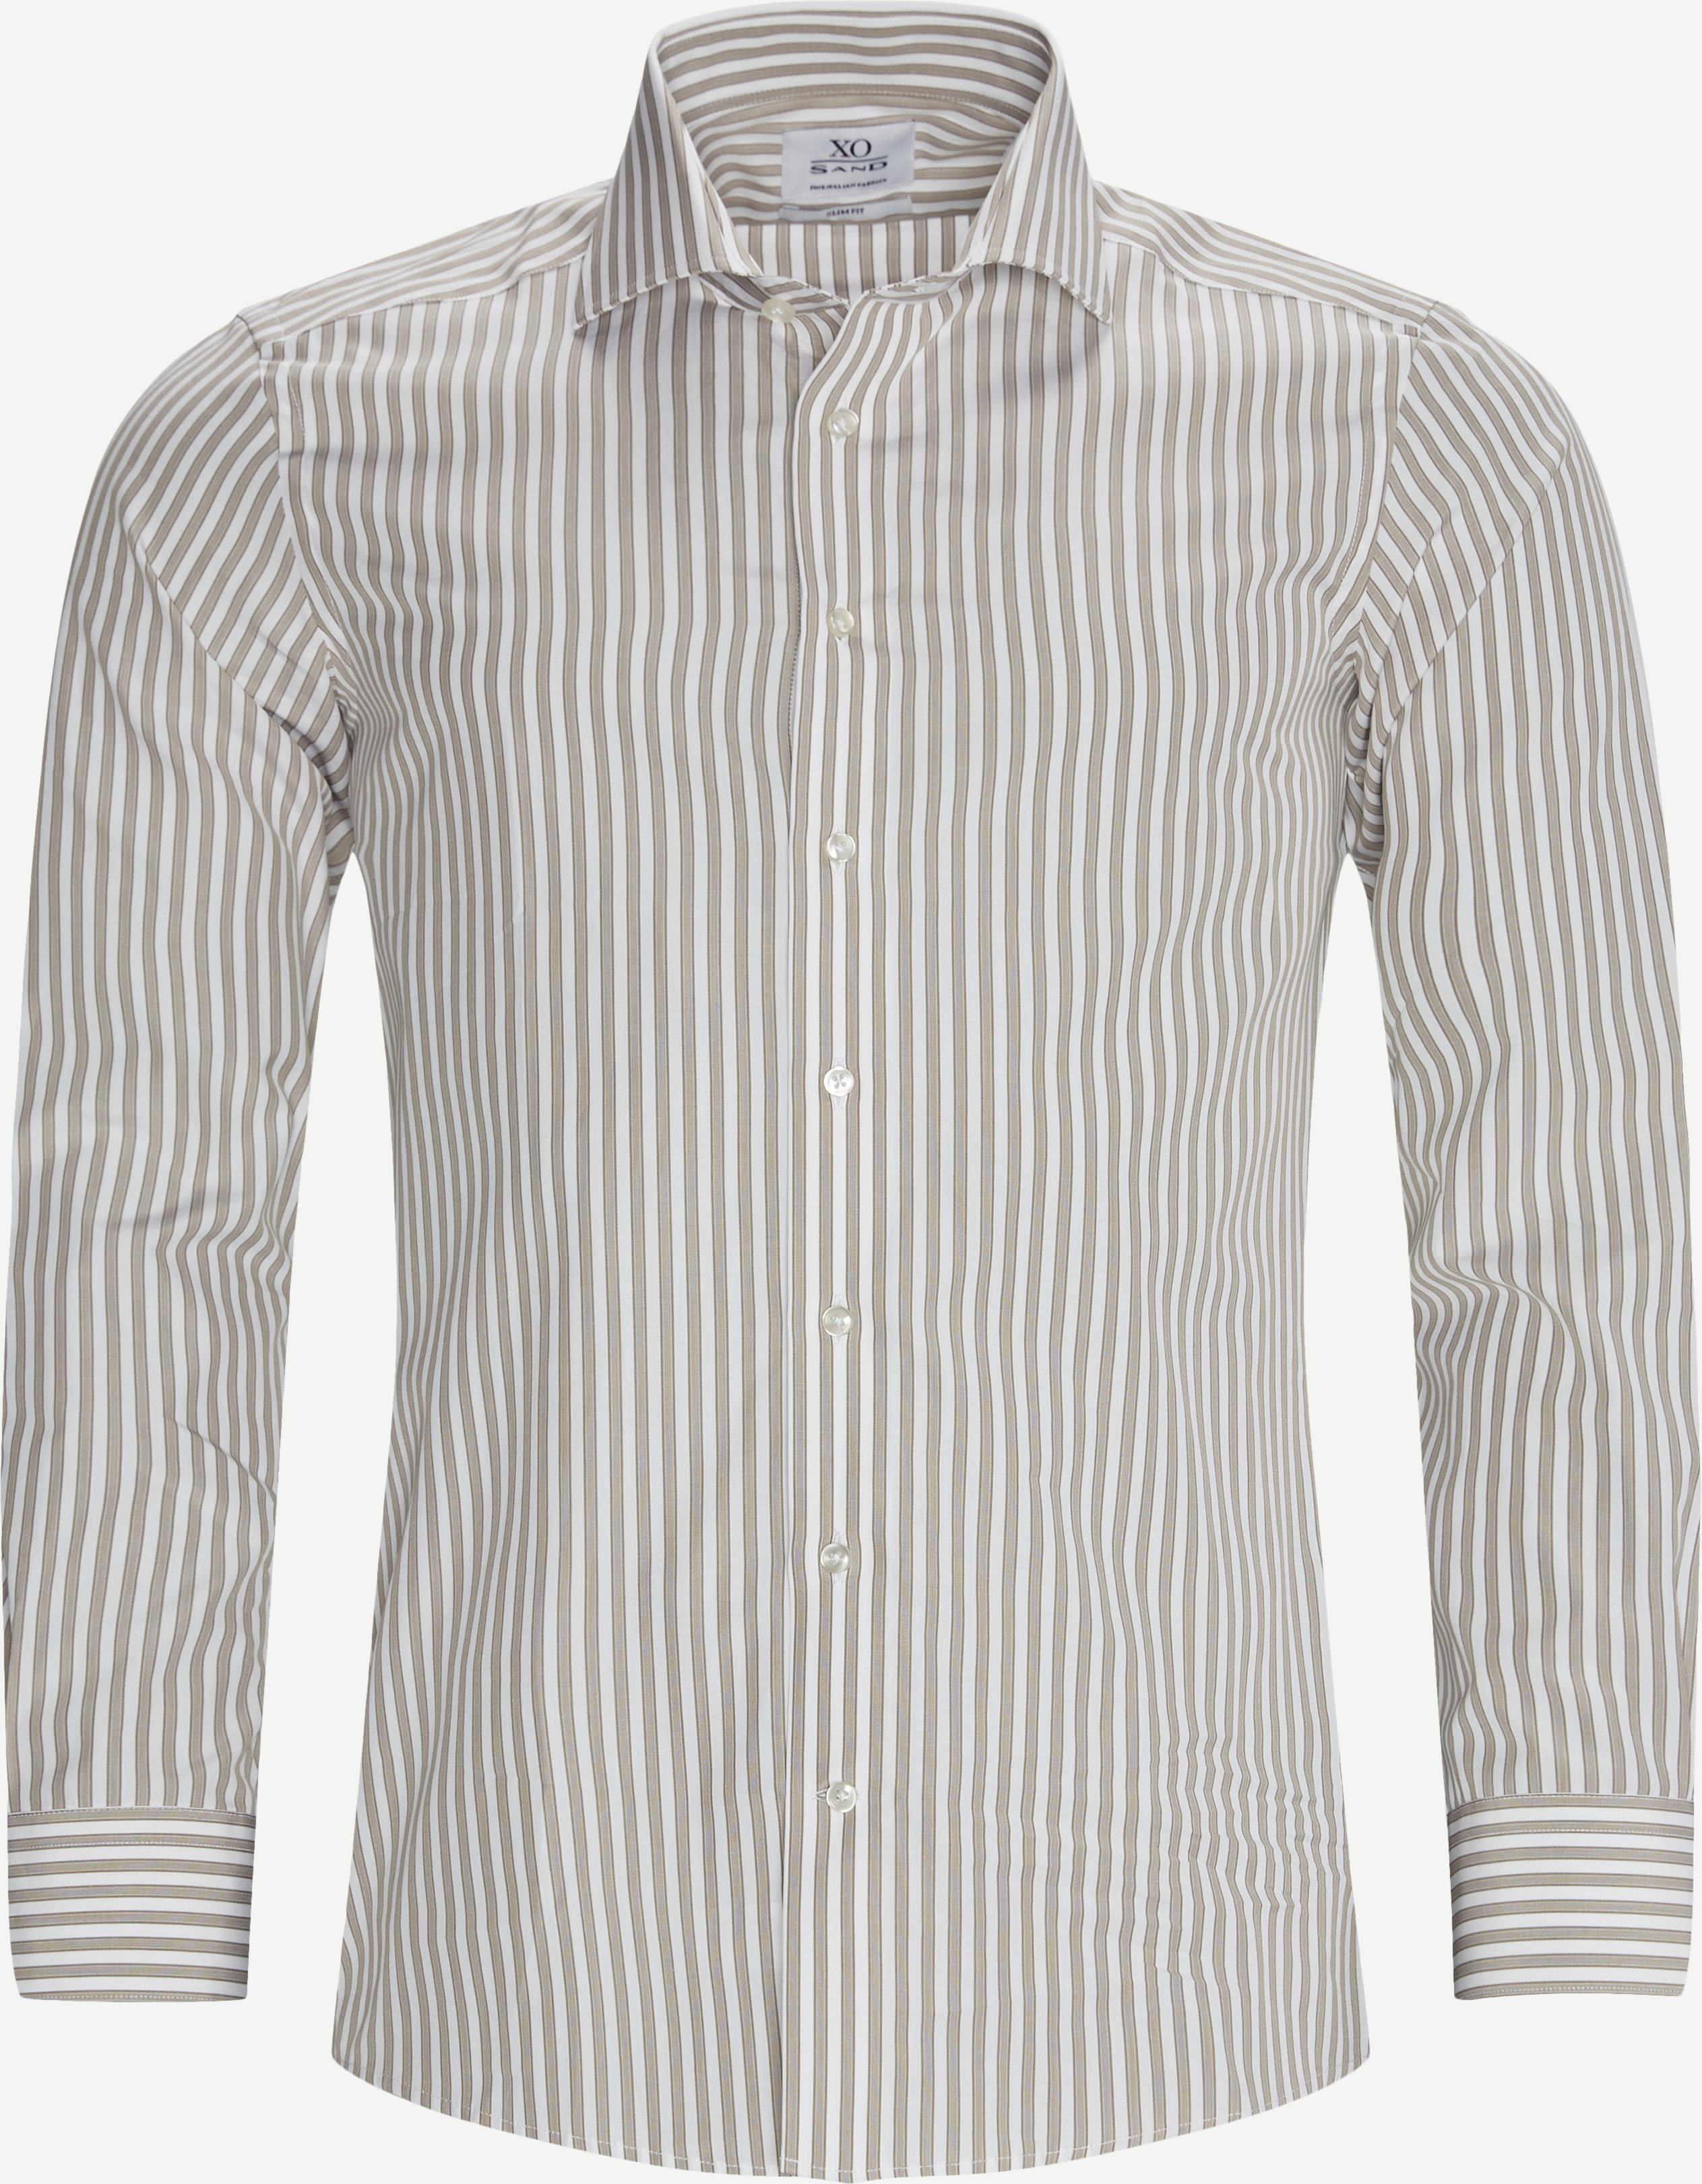 Sand clothes - Buy Sand shirts and blazers online at Kaufmann